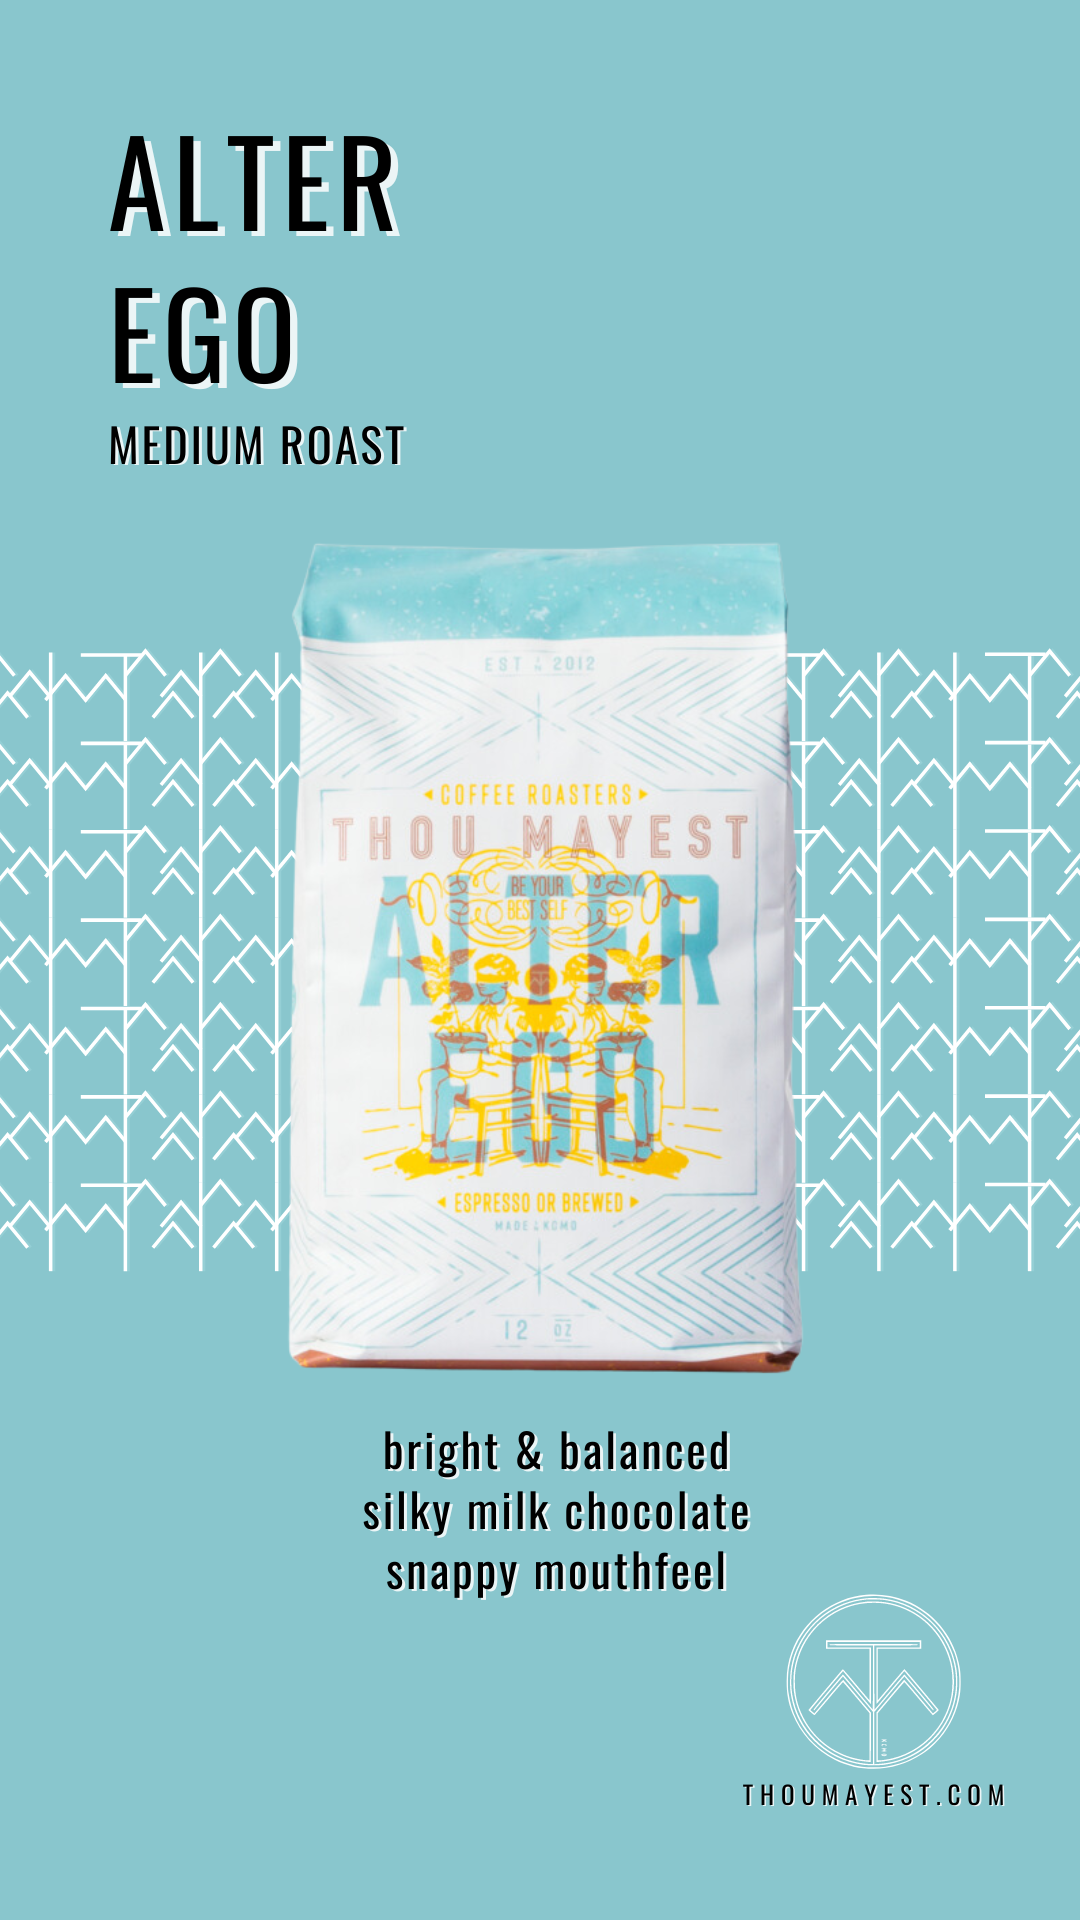 Image of Alter Ego 12oz bag of coffee with description: Medium roast. Bright & Balanced. Silky Milk Chocolate. Snappy Mouthfeel. 